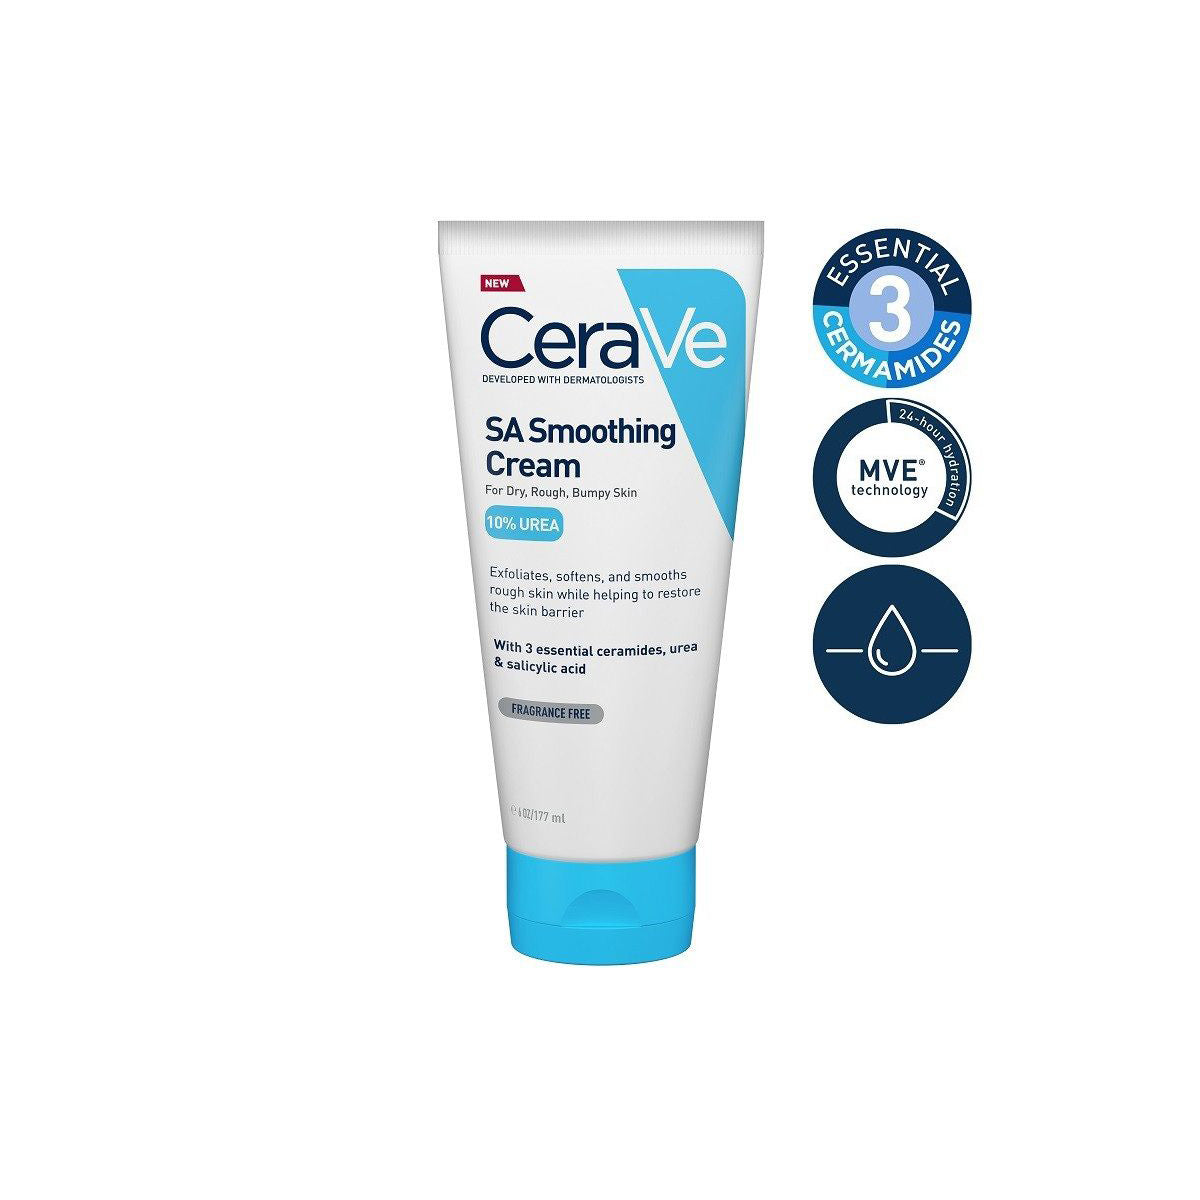 CeraVe SA Smoothing Cream Tube with Salicylic Acid for Dry, Rough & Bumpy Skin 177ml